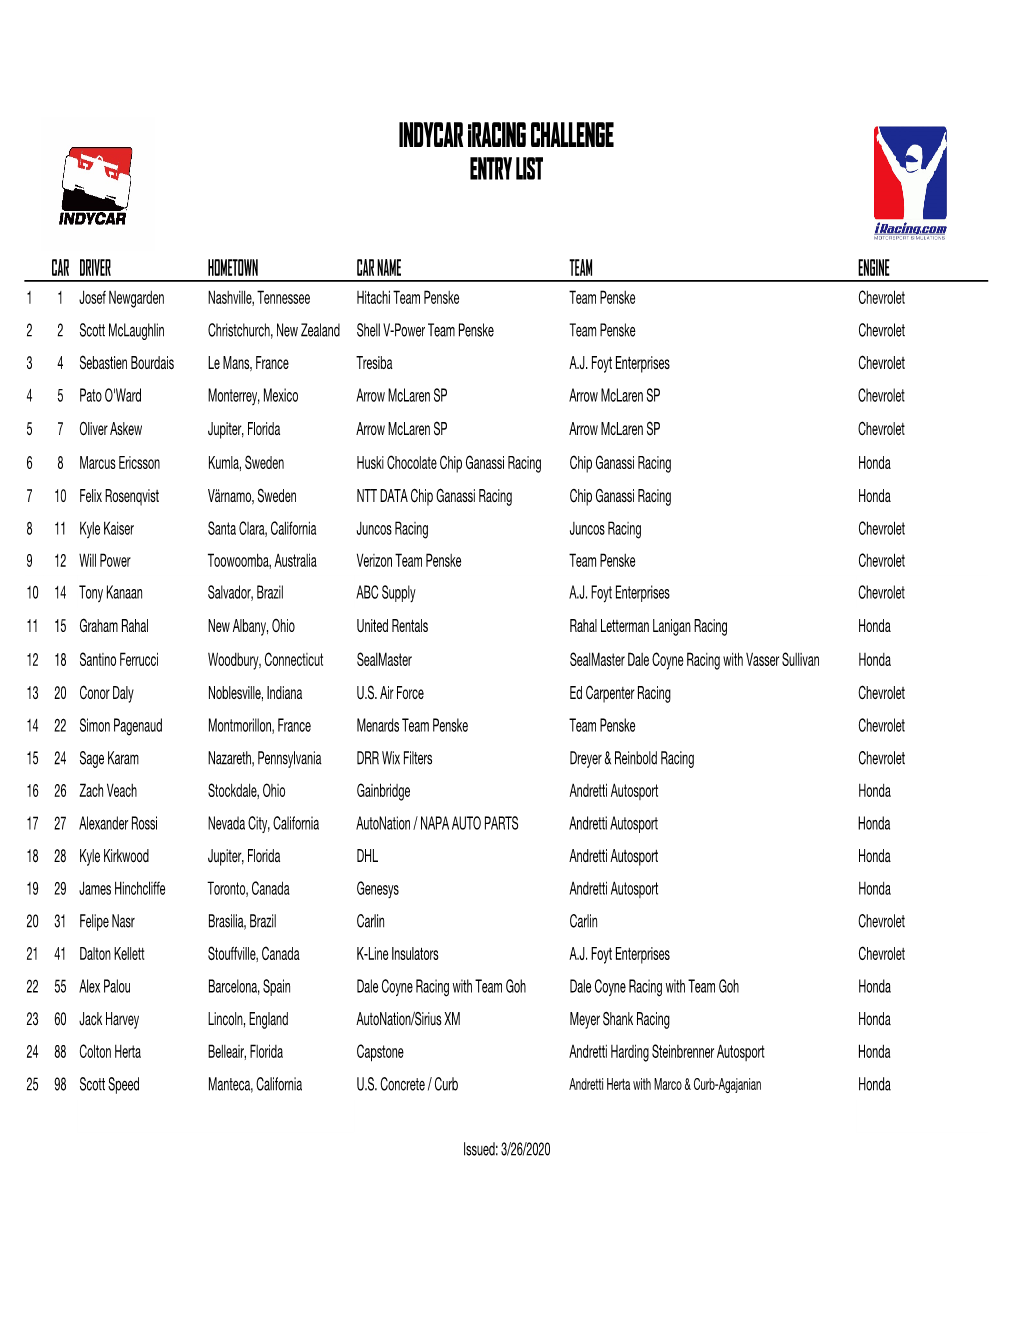 INDYCAR Iracing CHALLENGE ENTRY LIST